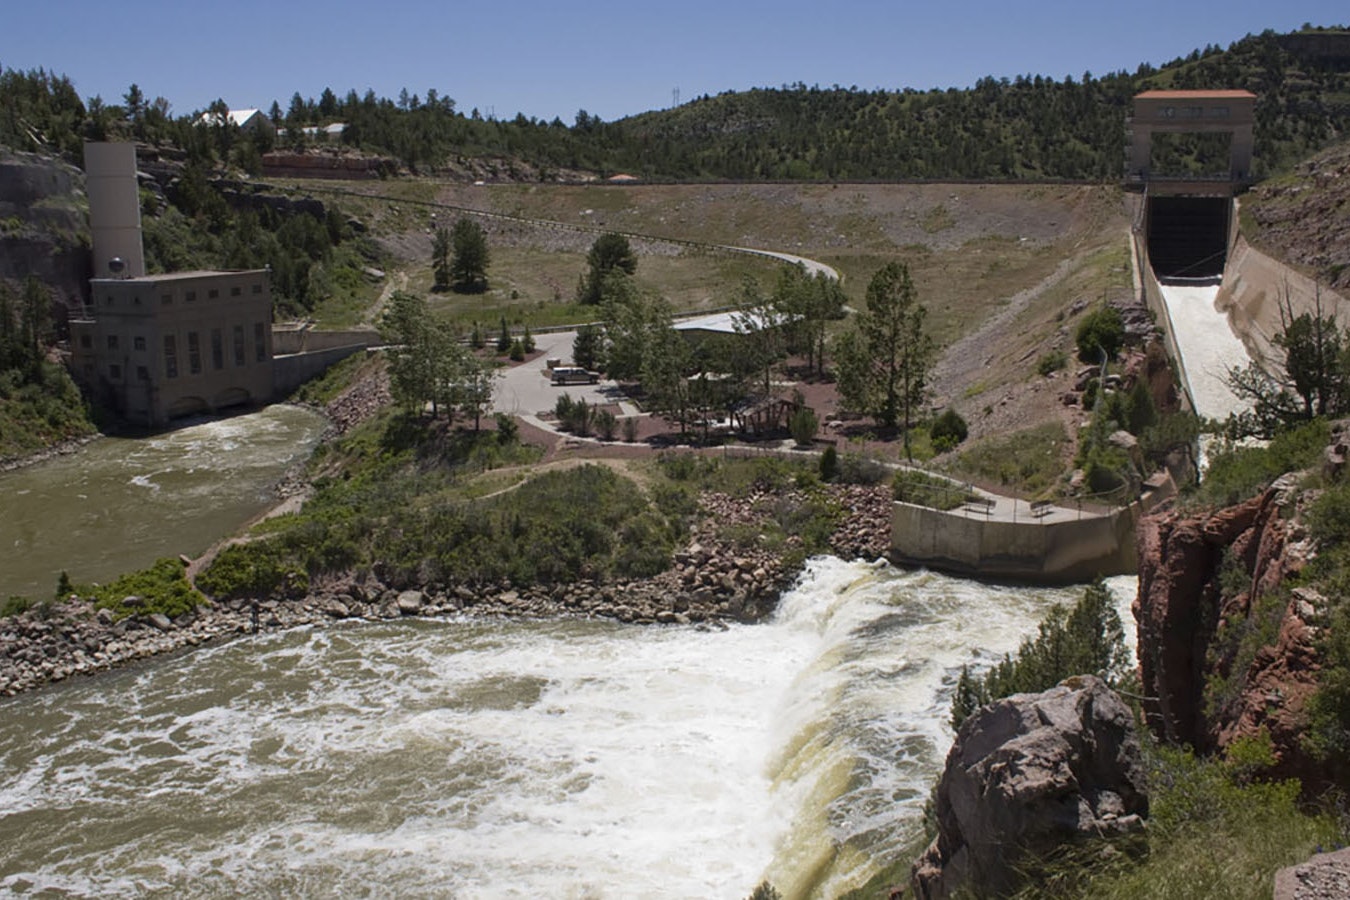 An overview of the Guernsey Dam, which feeds agriculture and ranching operations downriver.